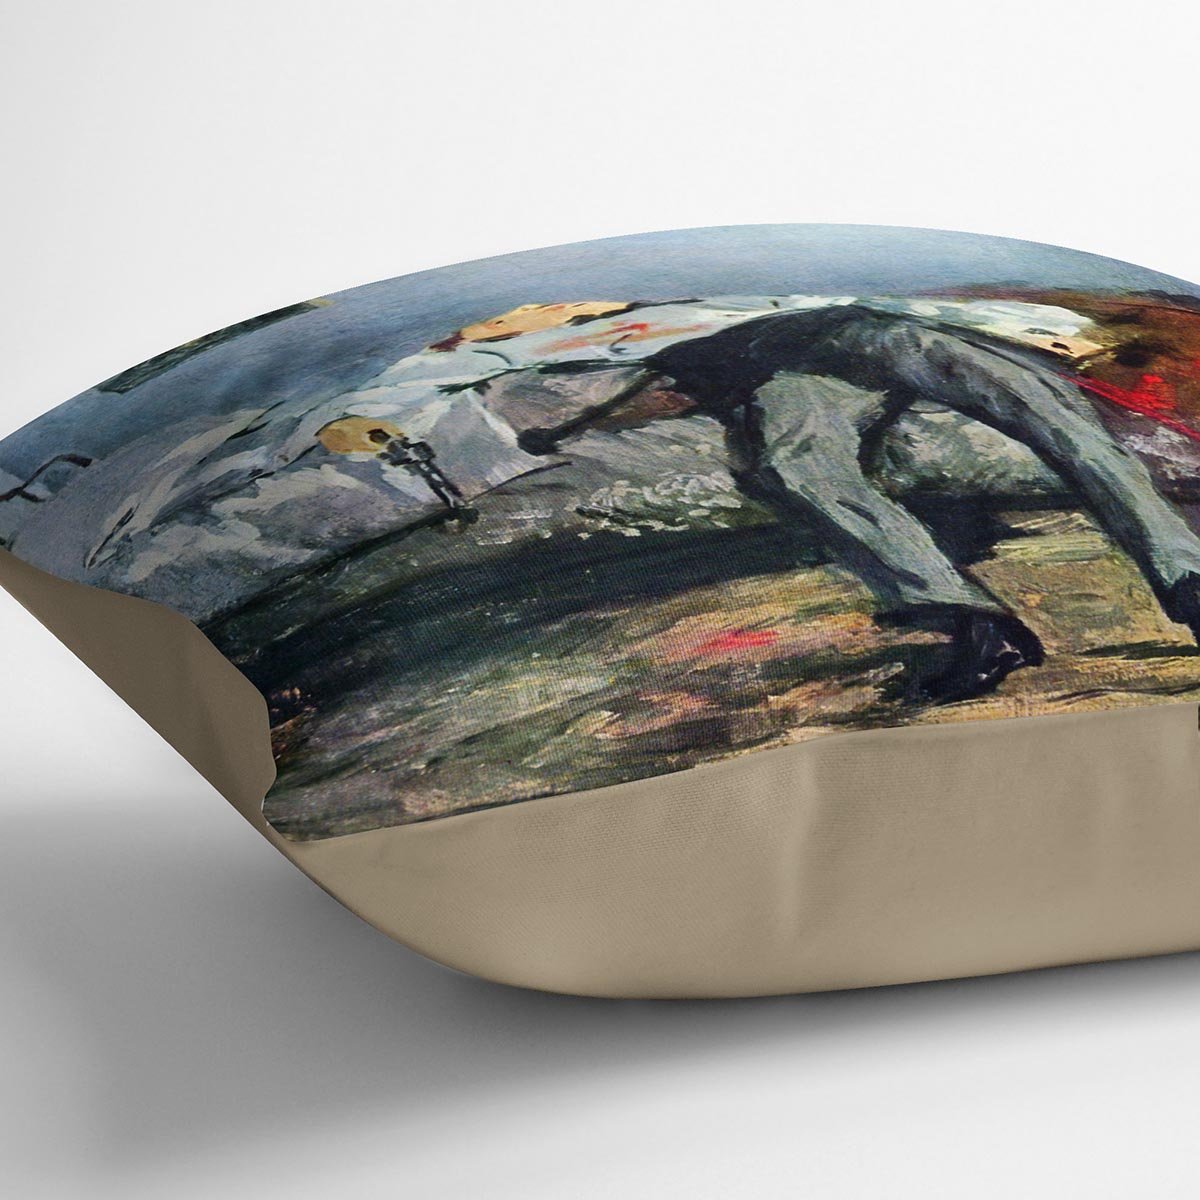 Suicide by Manet Throw Pillow